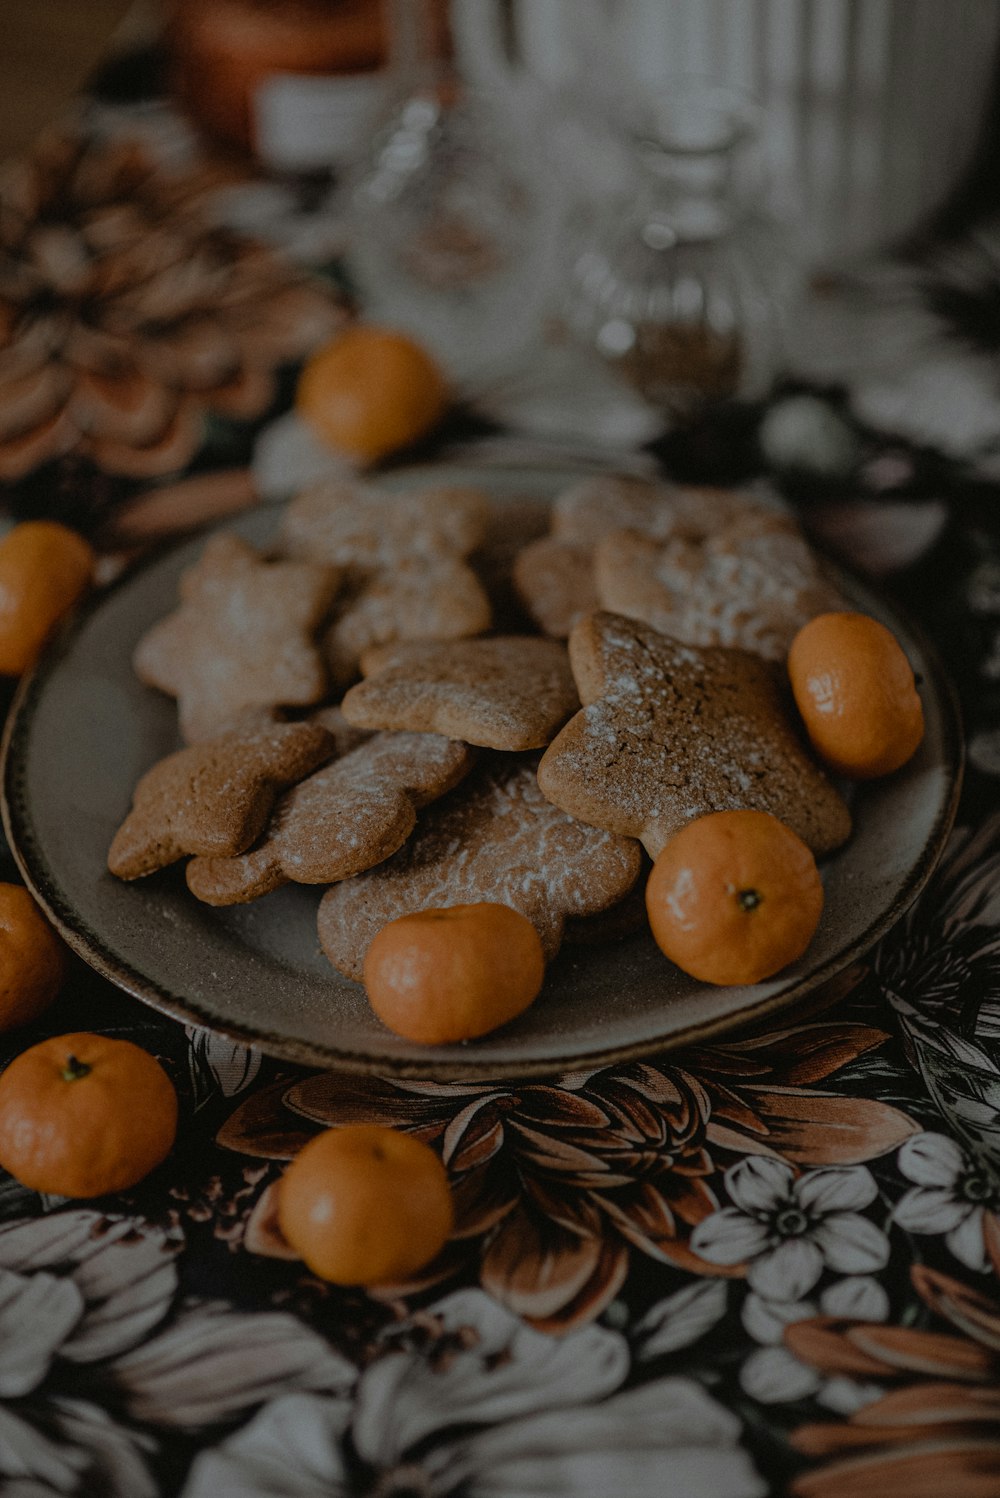 a plate of cookies and oranges on a table